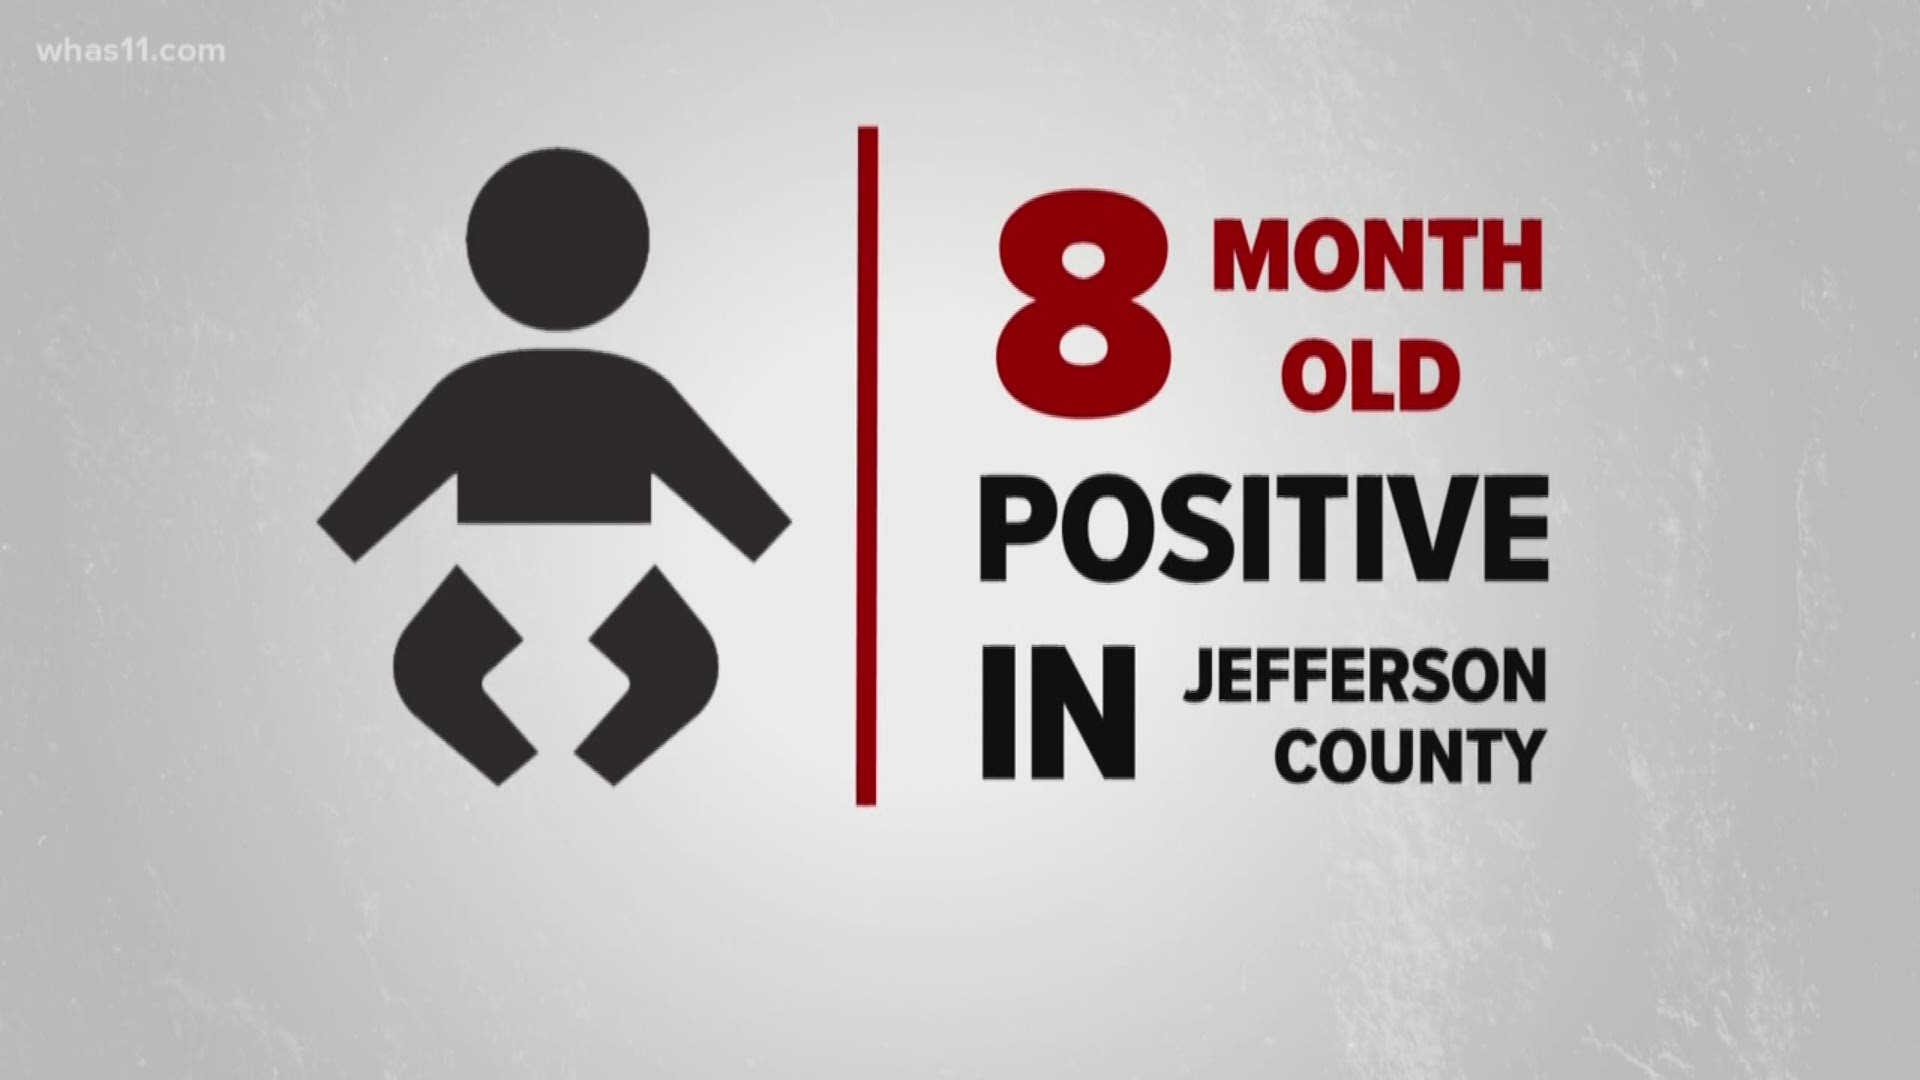 The youngest confirmed case of COVID-19 in Kentucky is an 8-month old child.